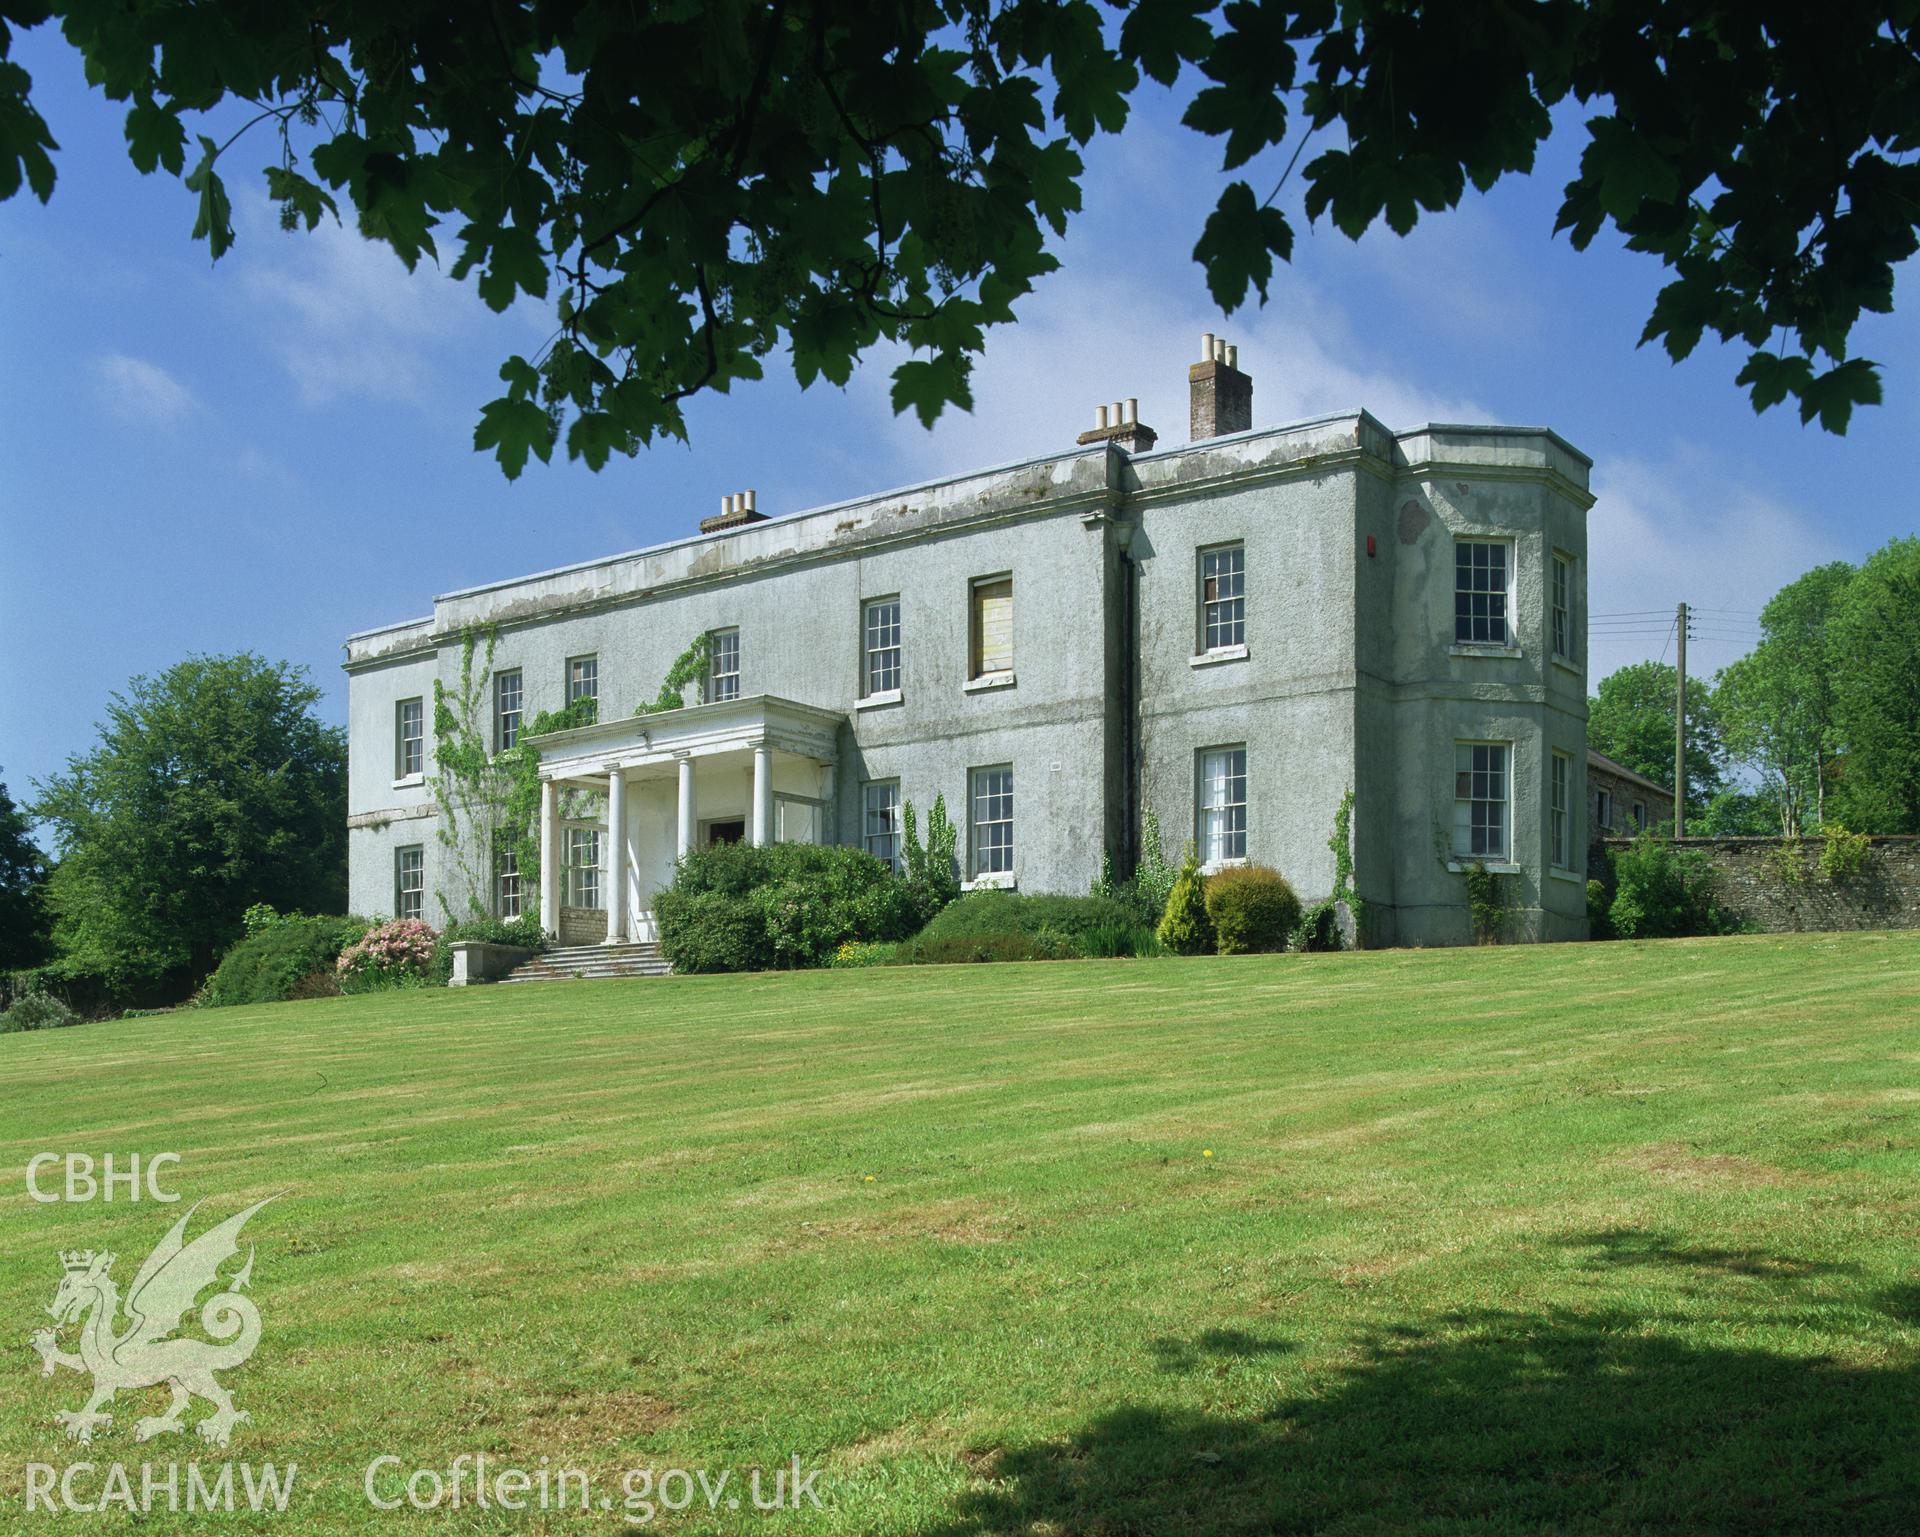 Colour transparency showing an exterior view of Plas Llansteffan, produced by Iain Wright, June 2004.